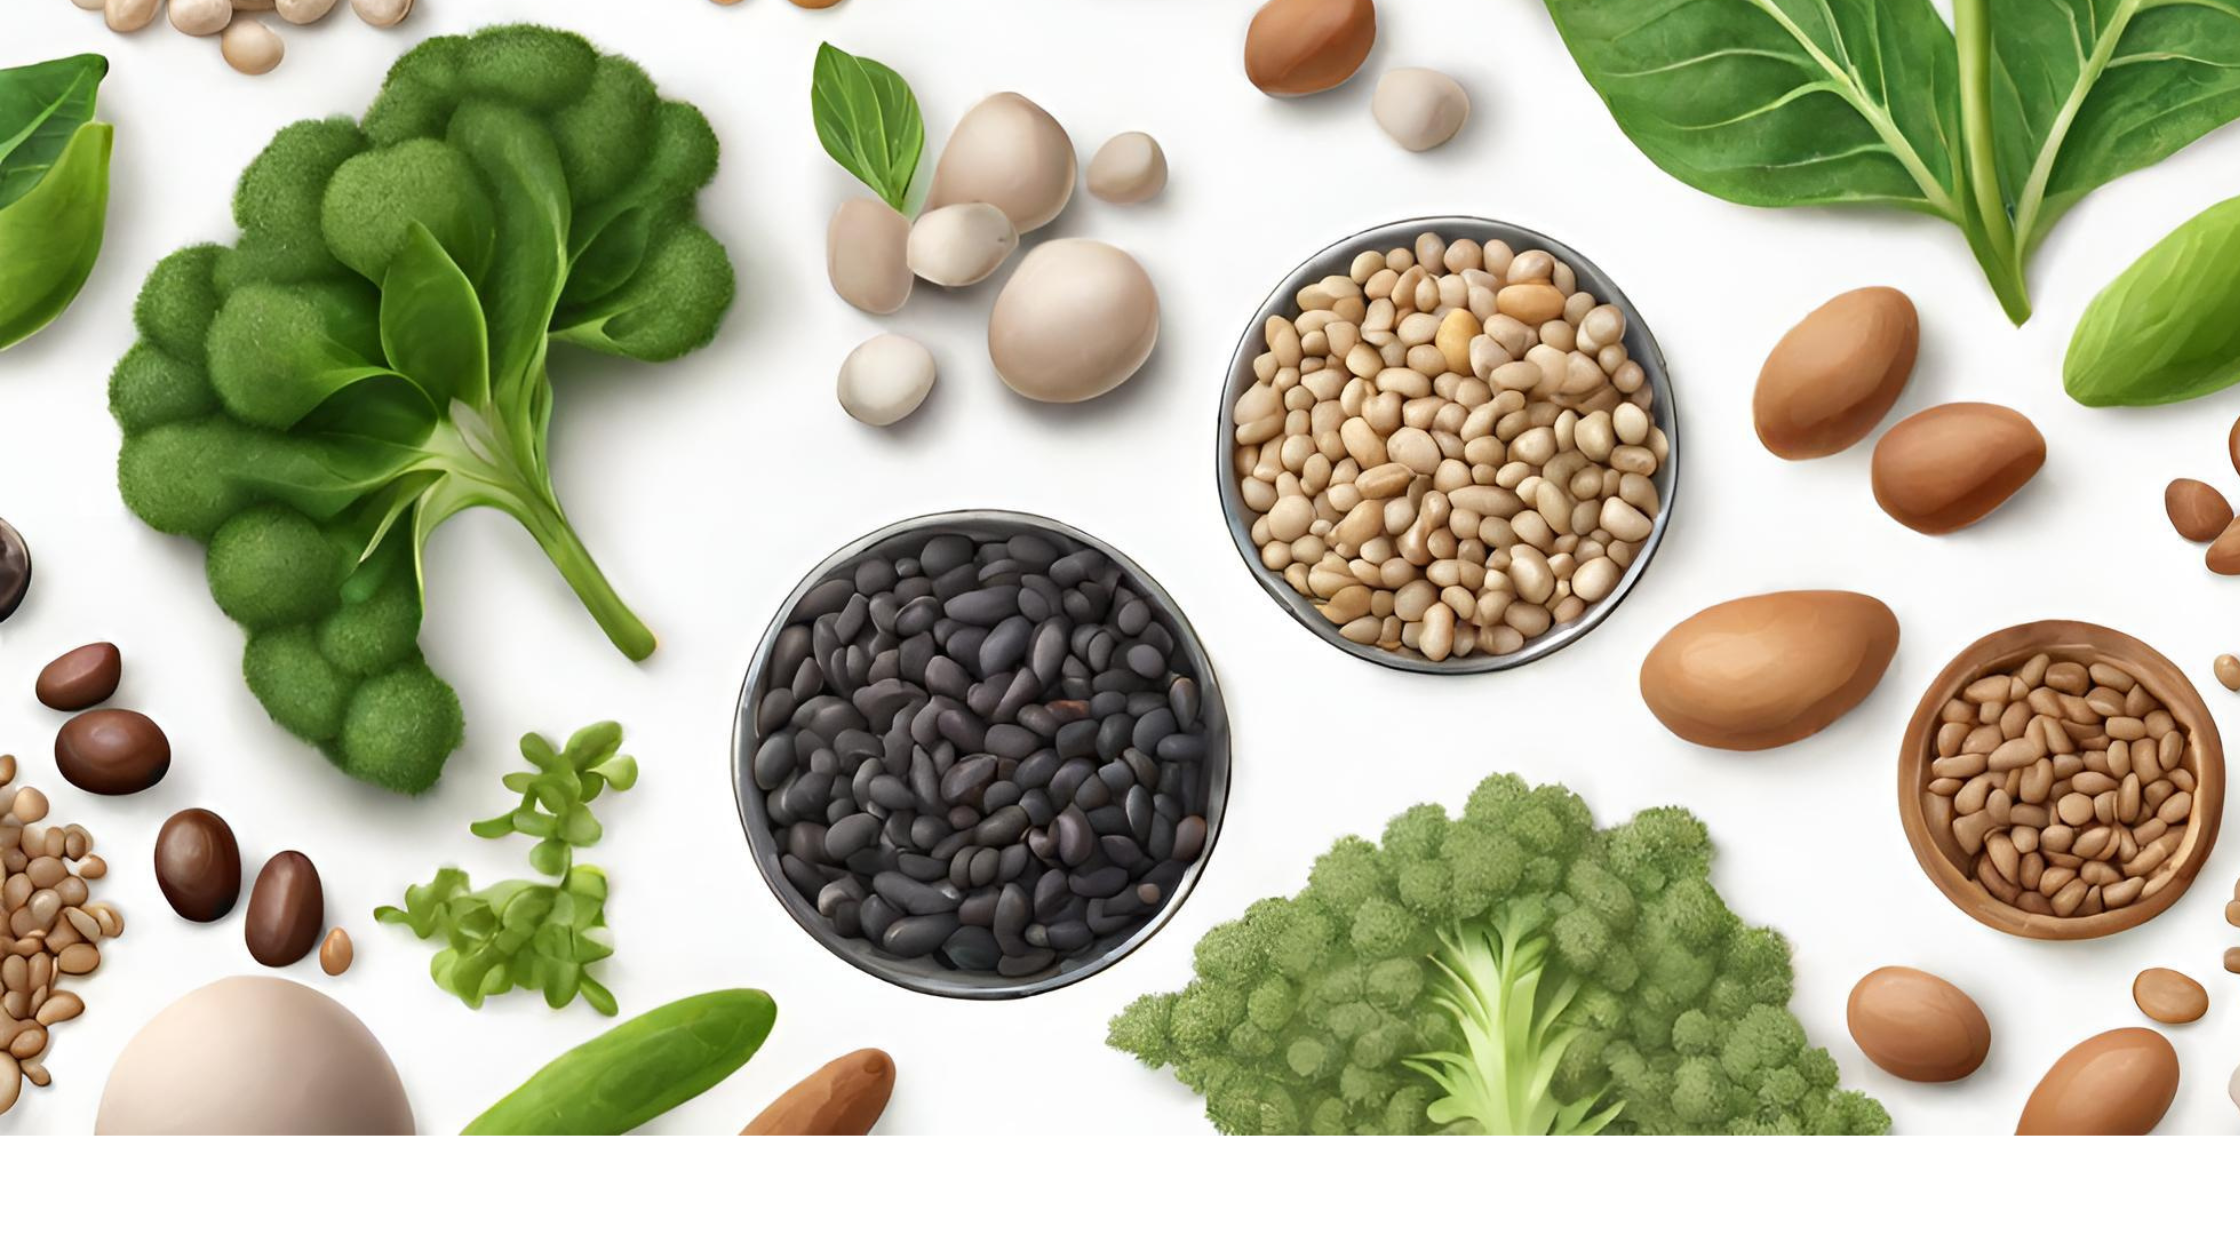 plant based protein sources